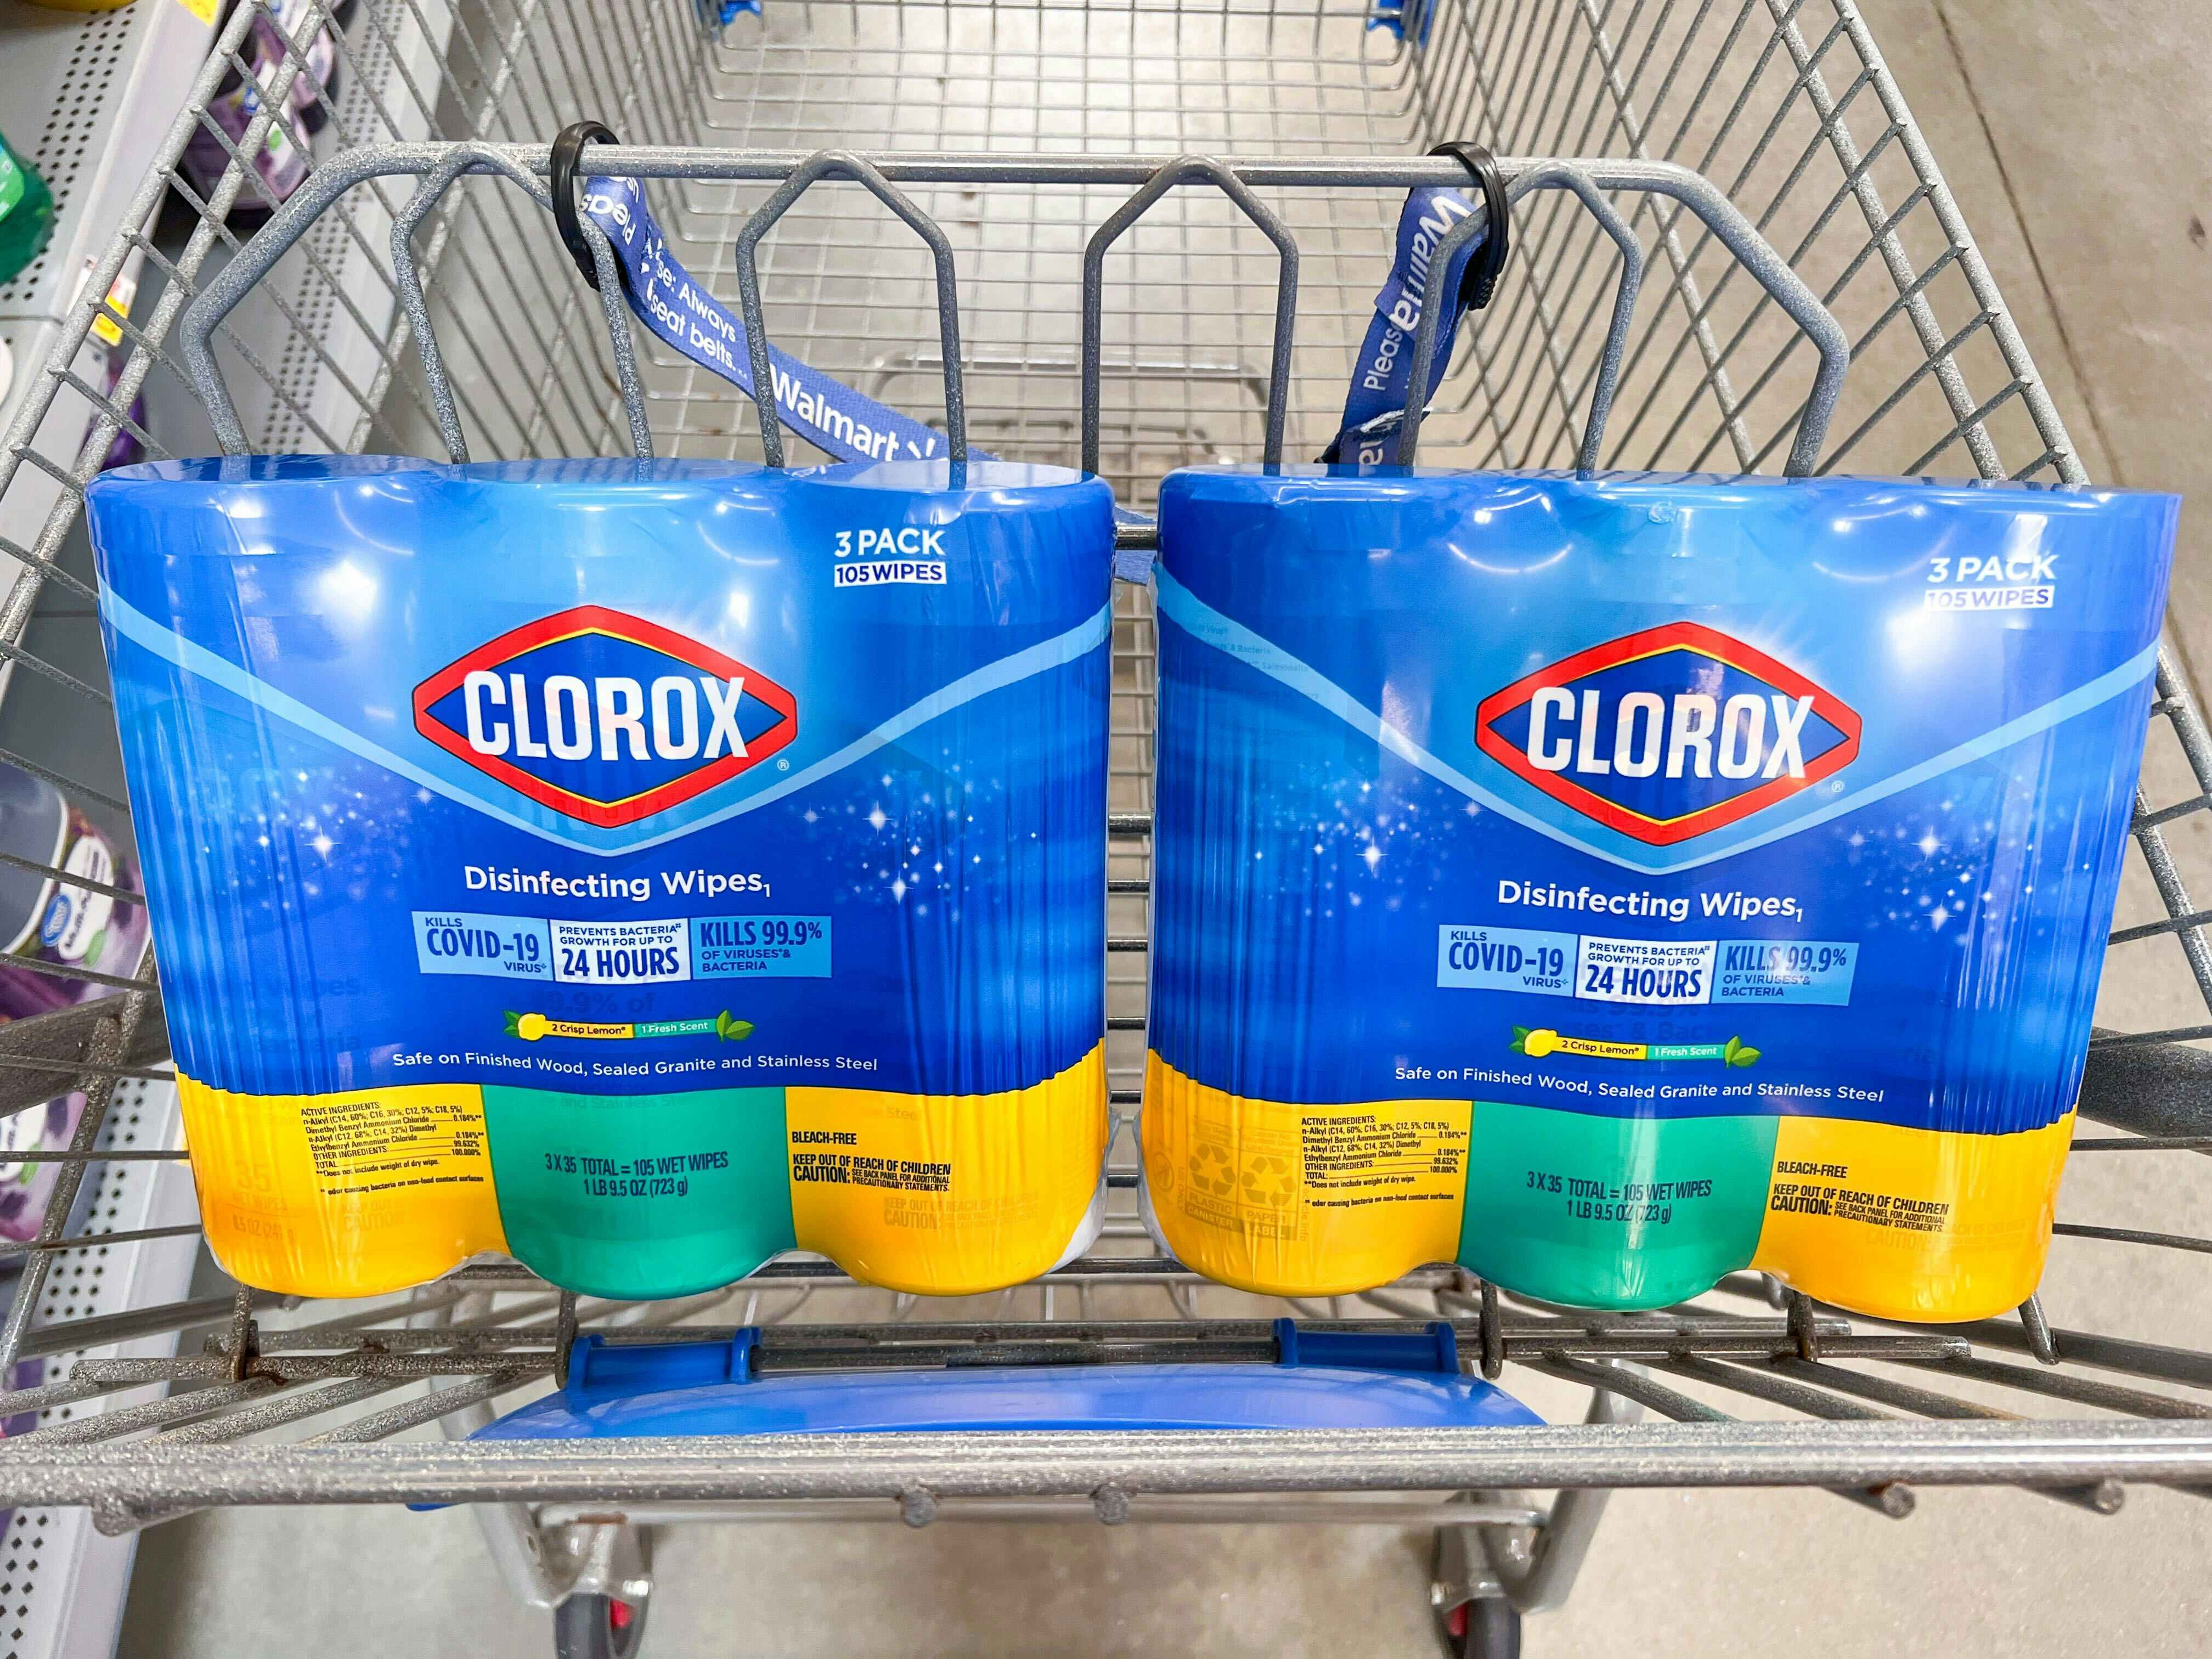 Two Clorox Disinfecting Wipes multi-pack products in Walmart shopping cart.